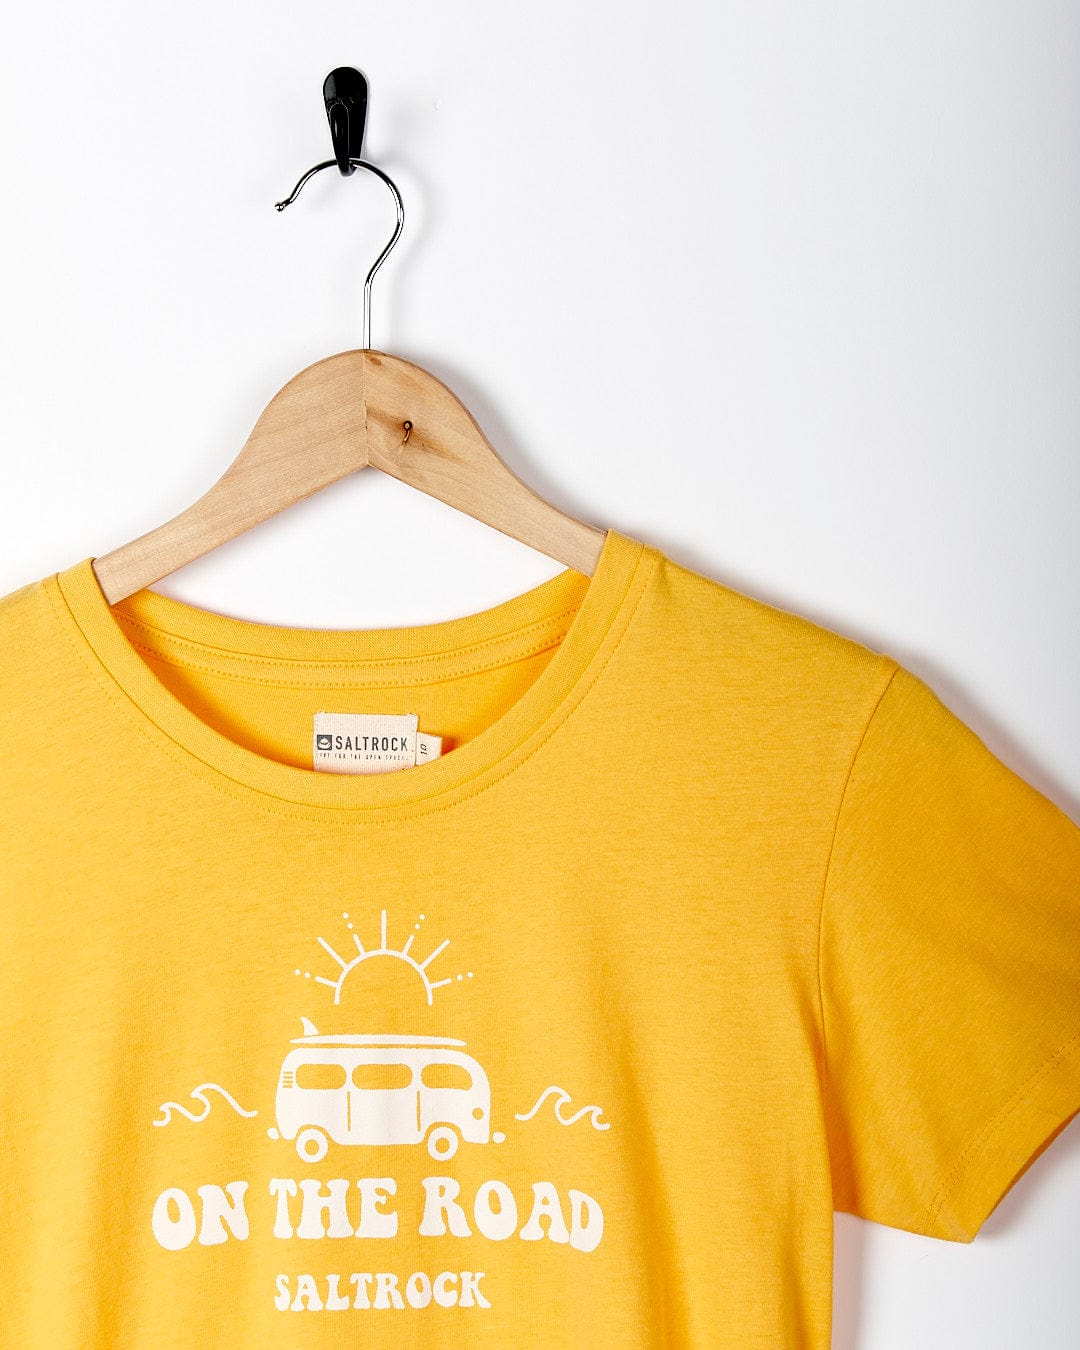 A Saltrock yellow t-shirt that says "On The Road".